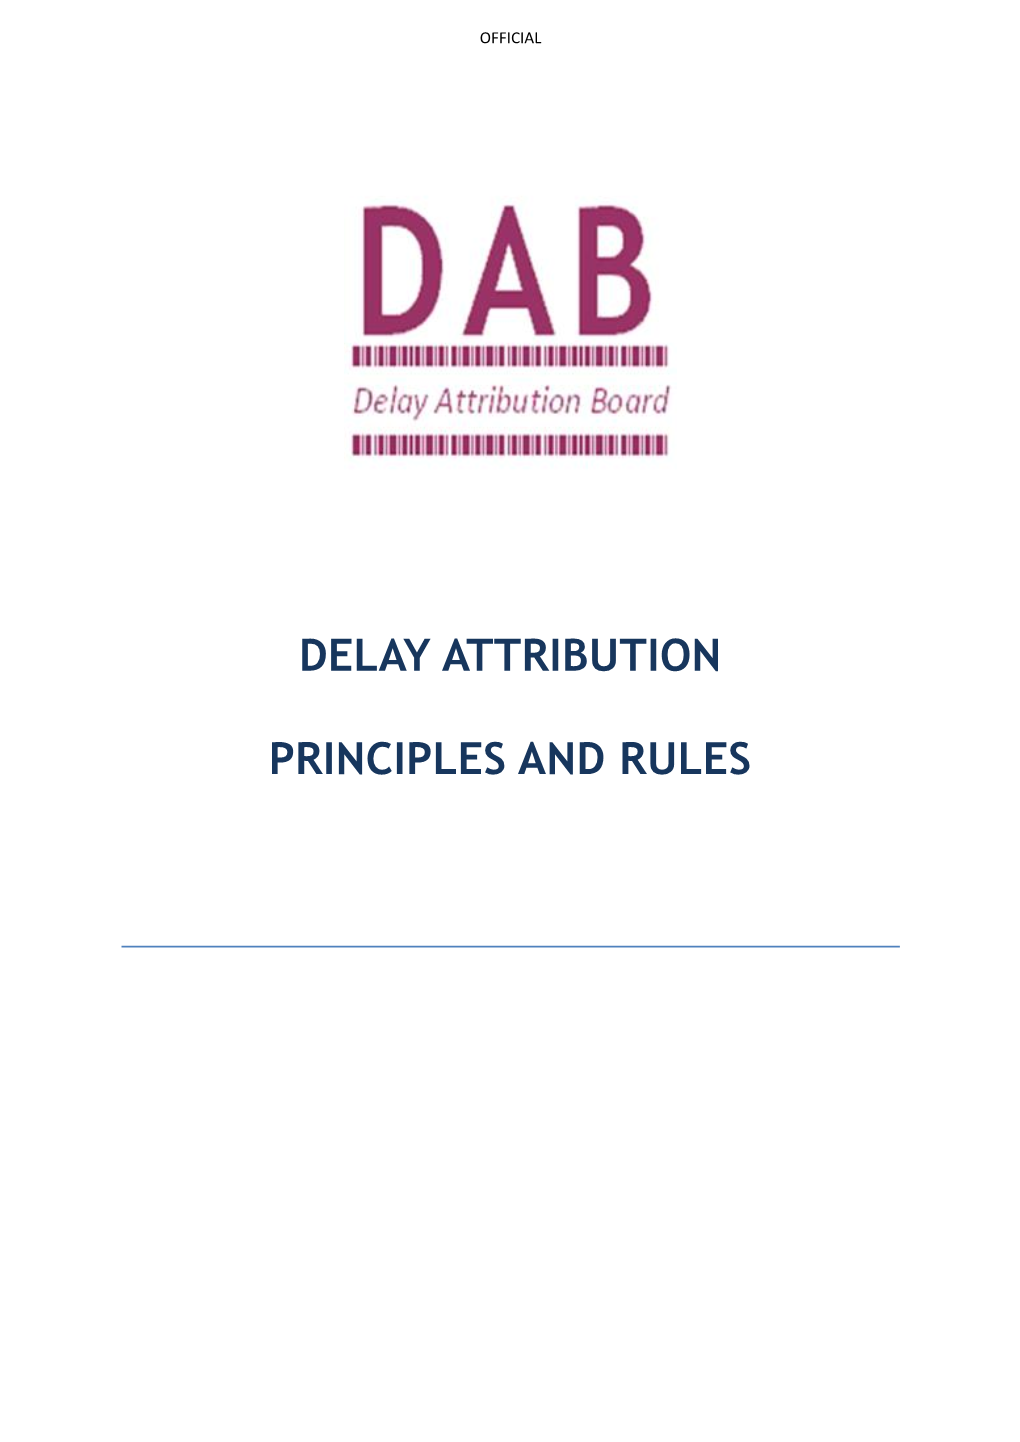 Delay Attribution Principles and Rules Is Issued to All Track Access Parties by the Delay Attribution Board